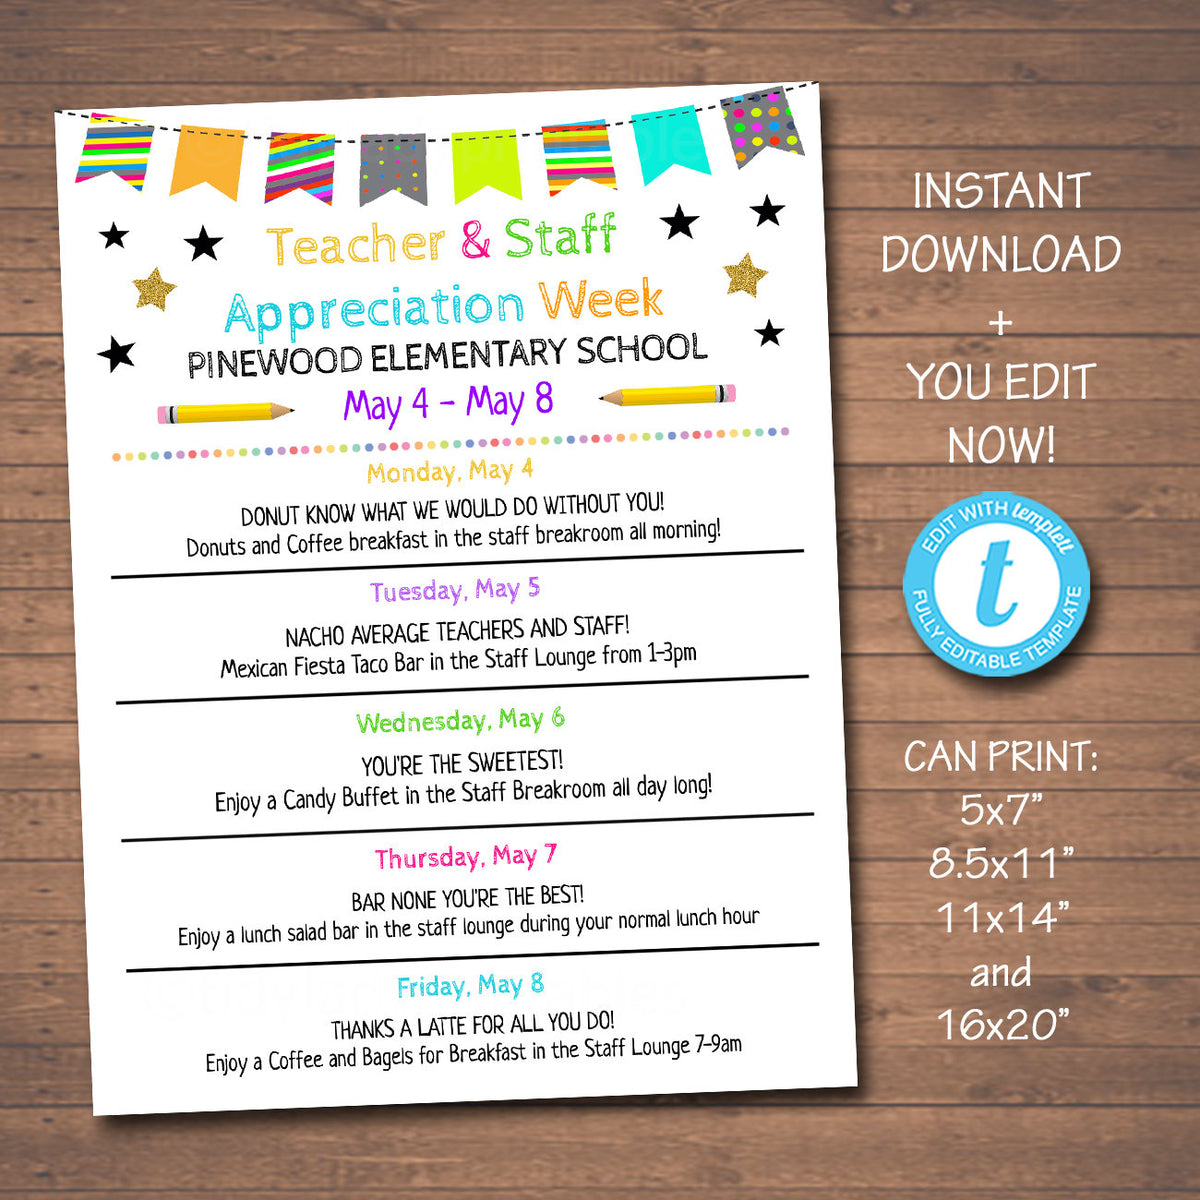 Teacher Appreciation Week Schedule Of Events Printable TidyLady Printables